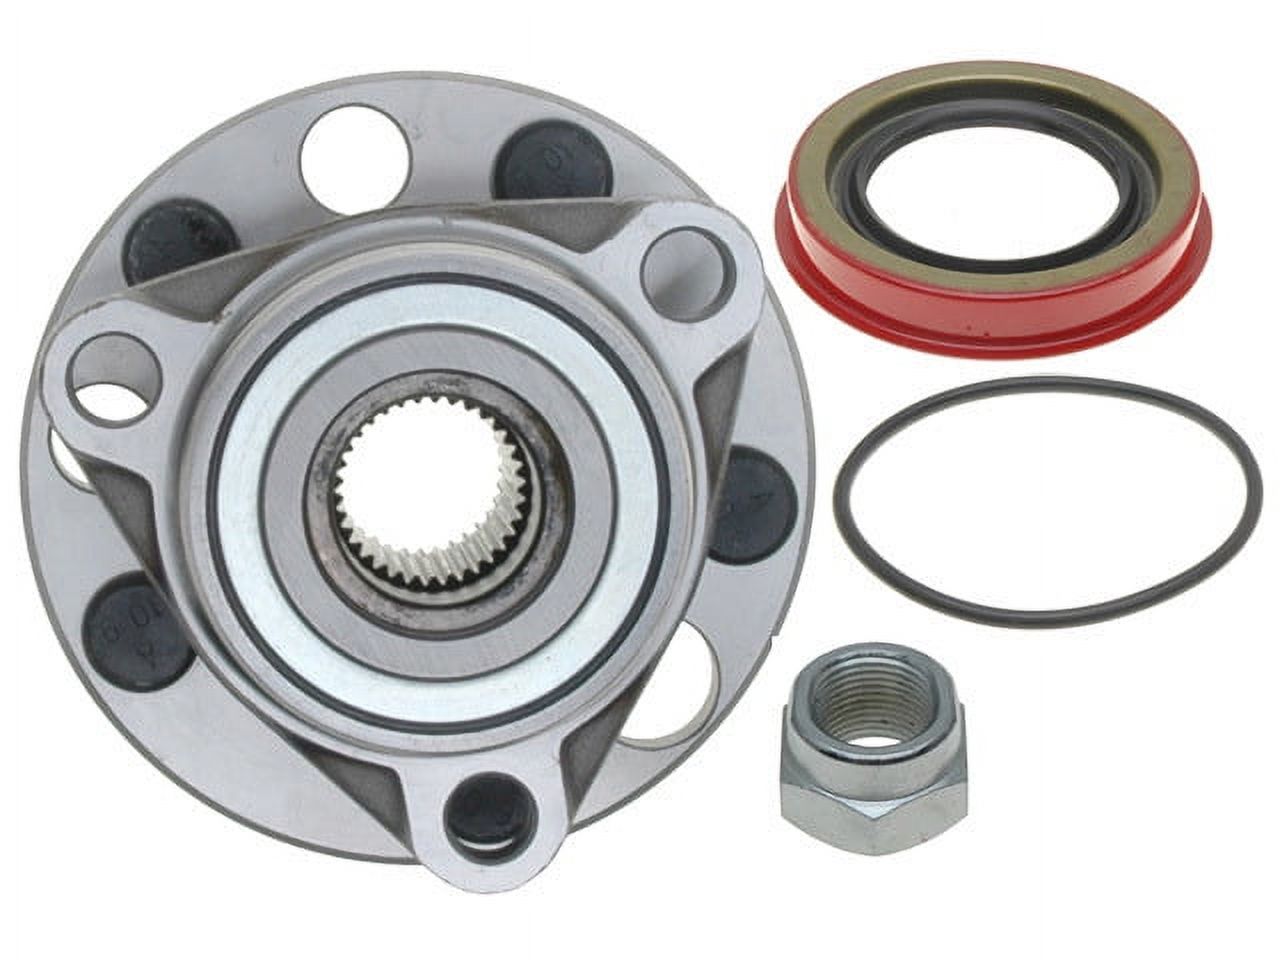 Raybestos Brakes Axle Bearing and Hub Assembly Repair Kit P/N:713017K Fits select: 1984-2005 CHEVROLET CAVALIER, 1995-2005 PONTIAC SUNFIRE - image 3 of 5